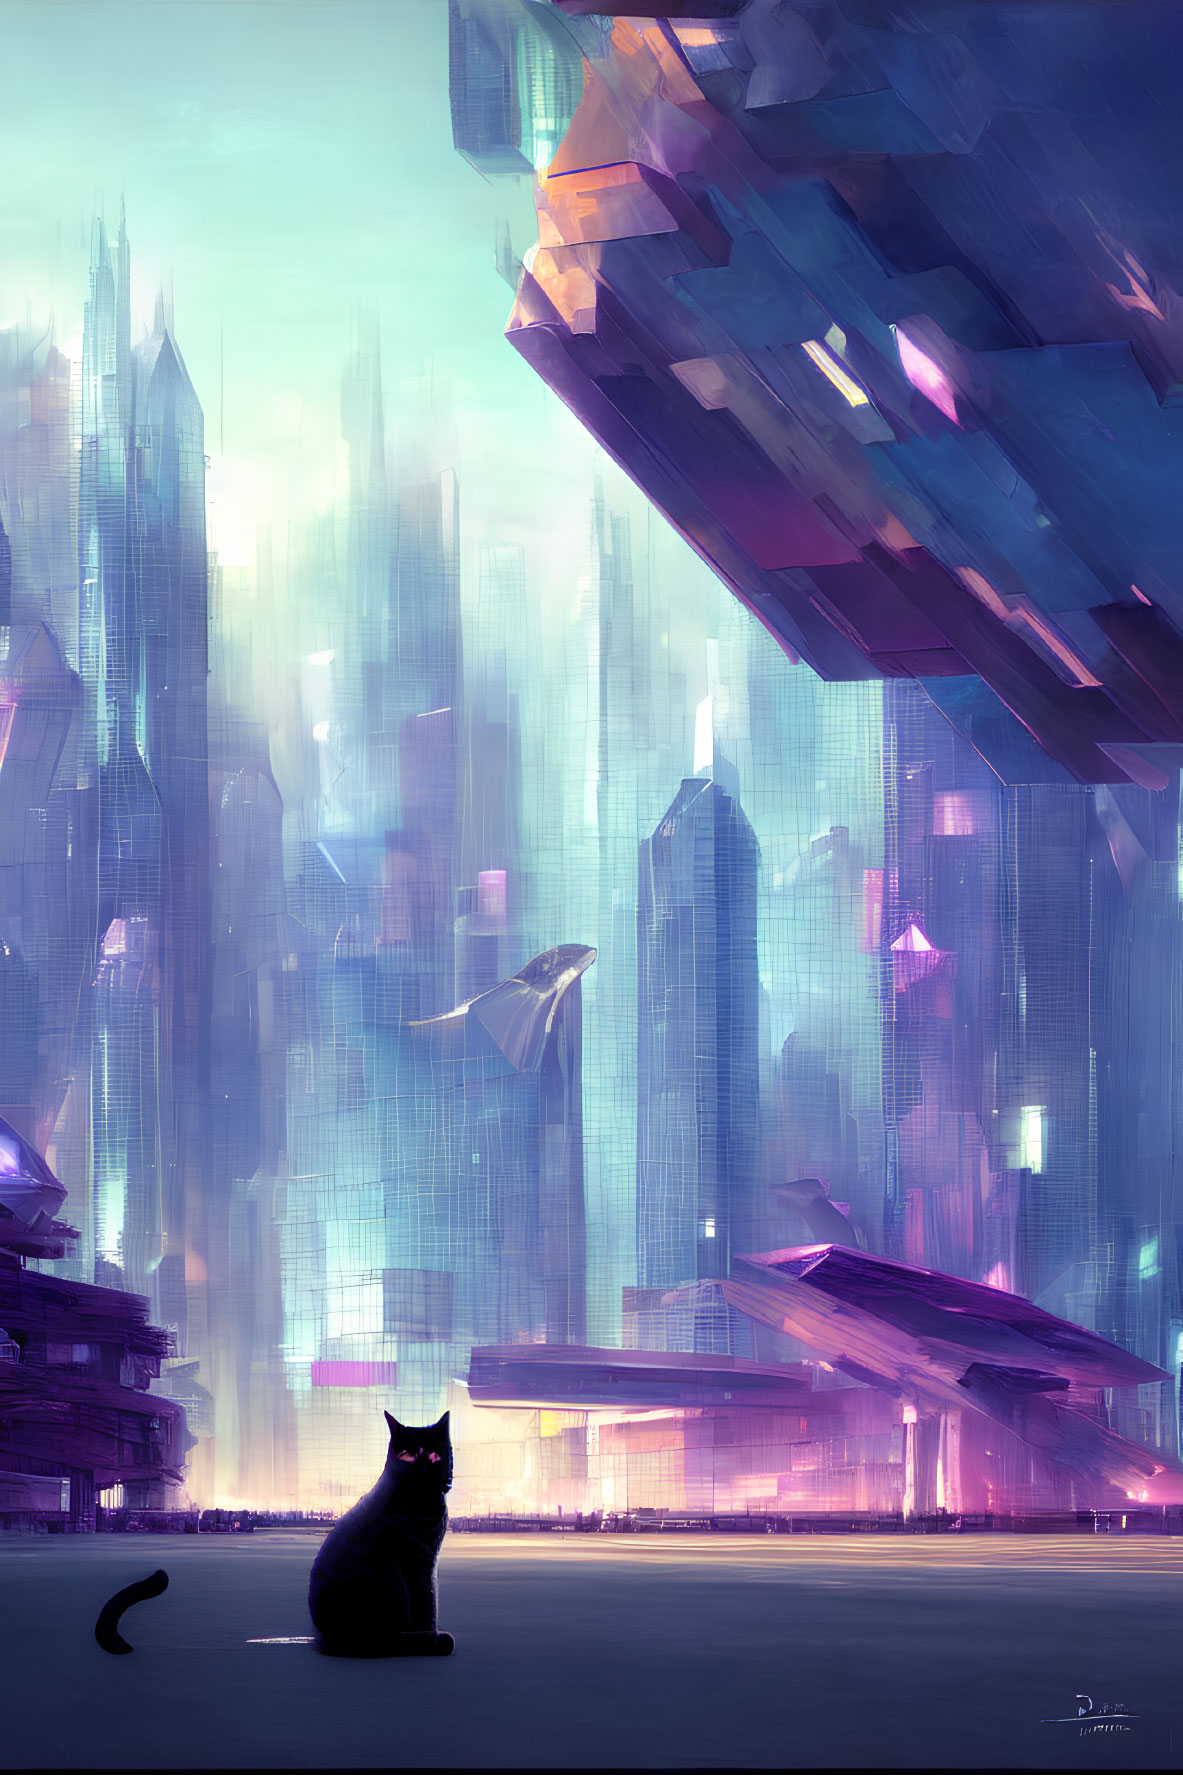 Black cat observing futuristic cityscape with skyscrapers and hovering ships